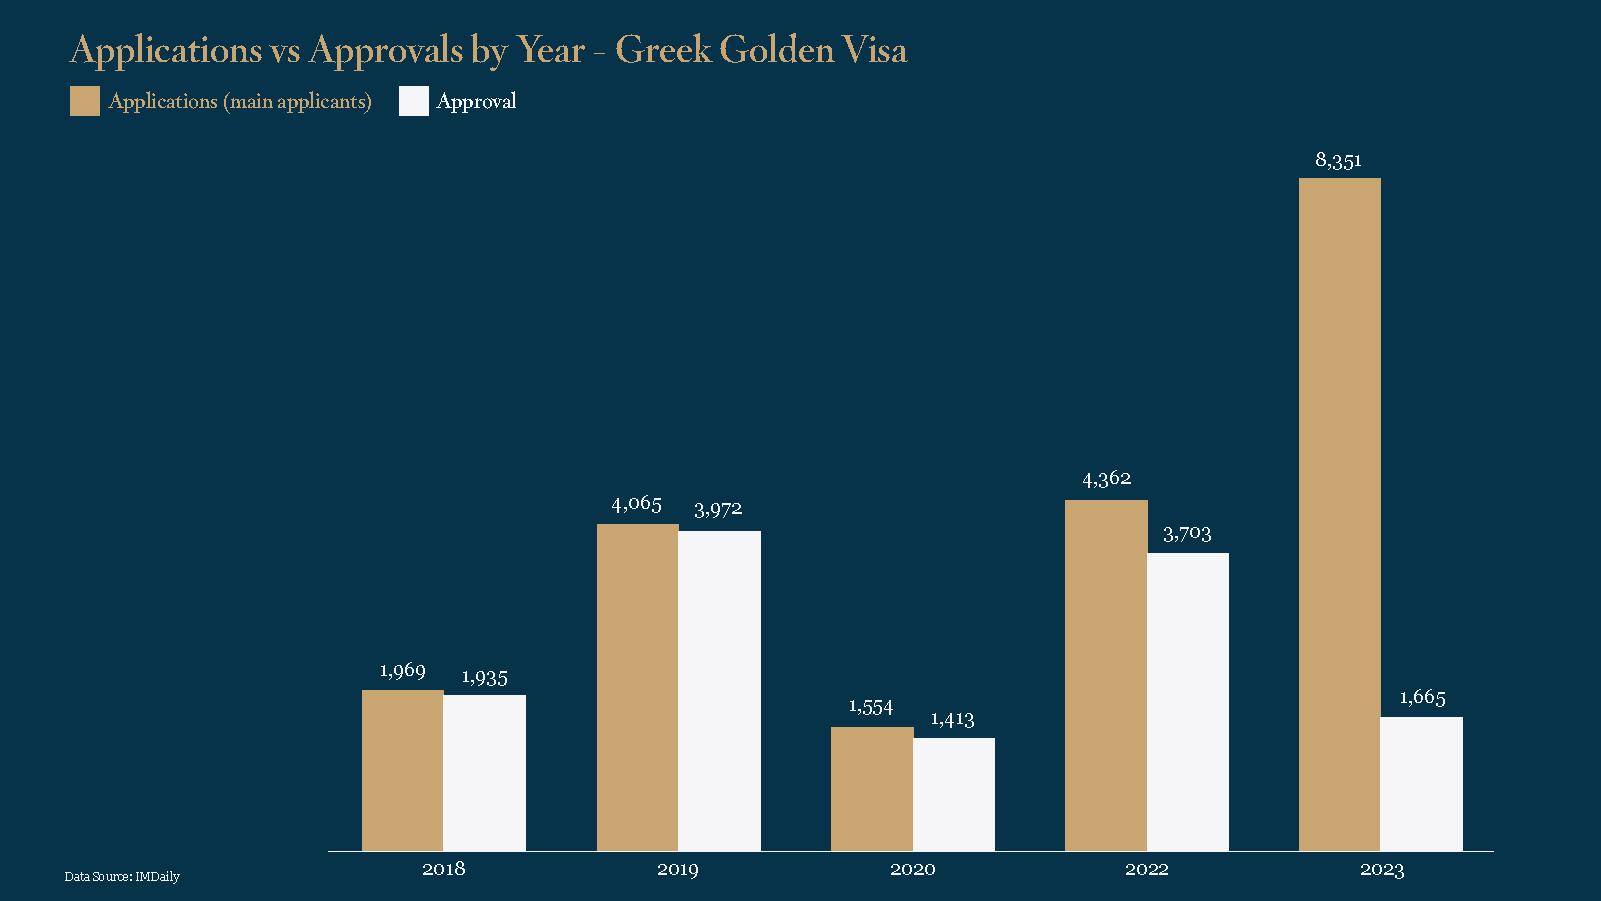 Comparing Greek Golden Visa Applications to Approvals Throughout the Years